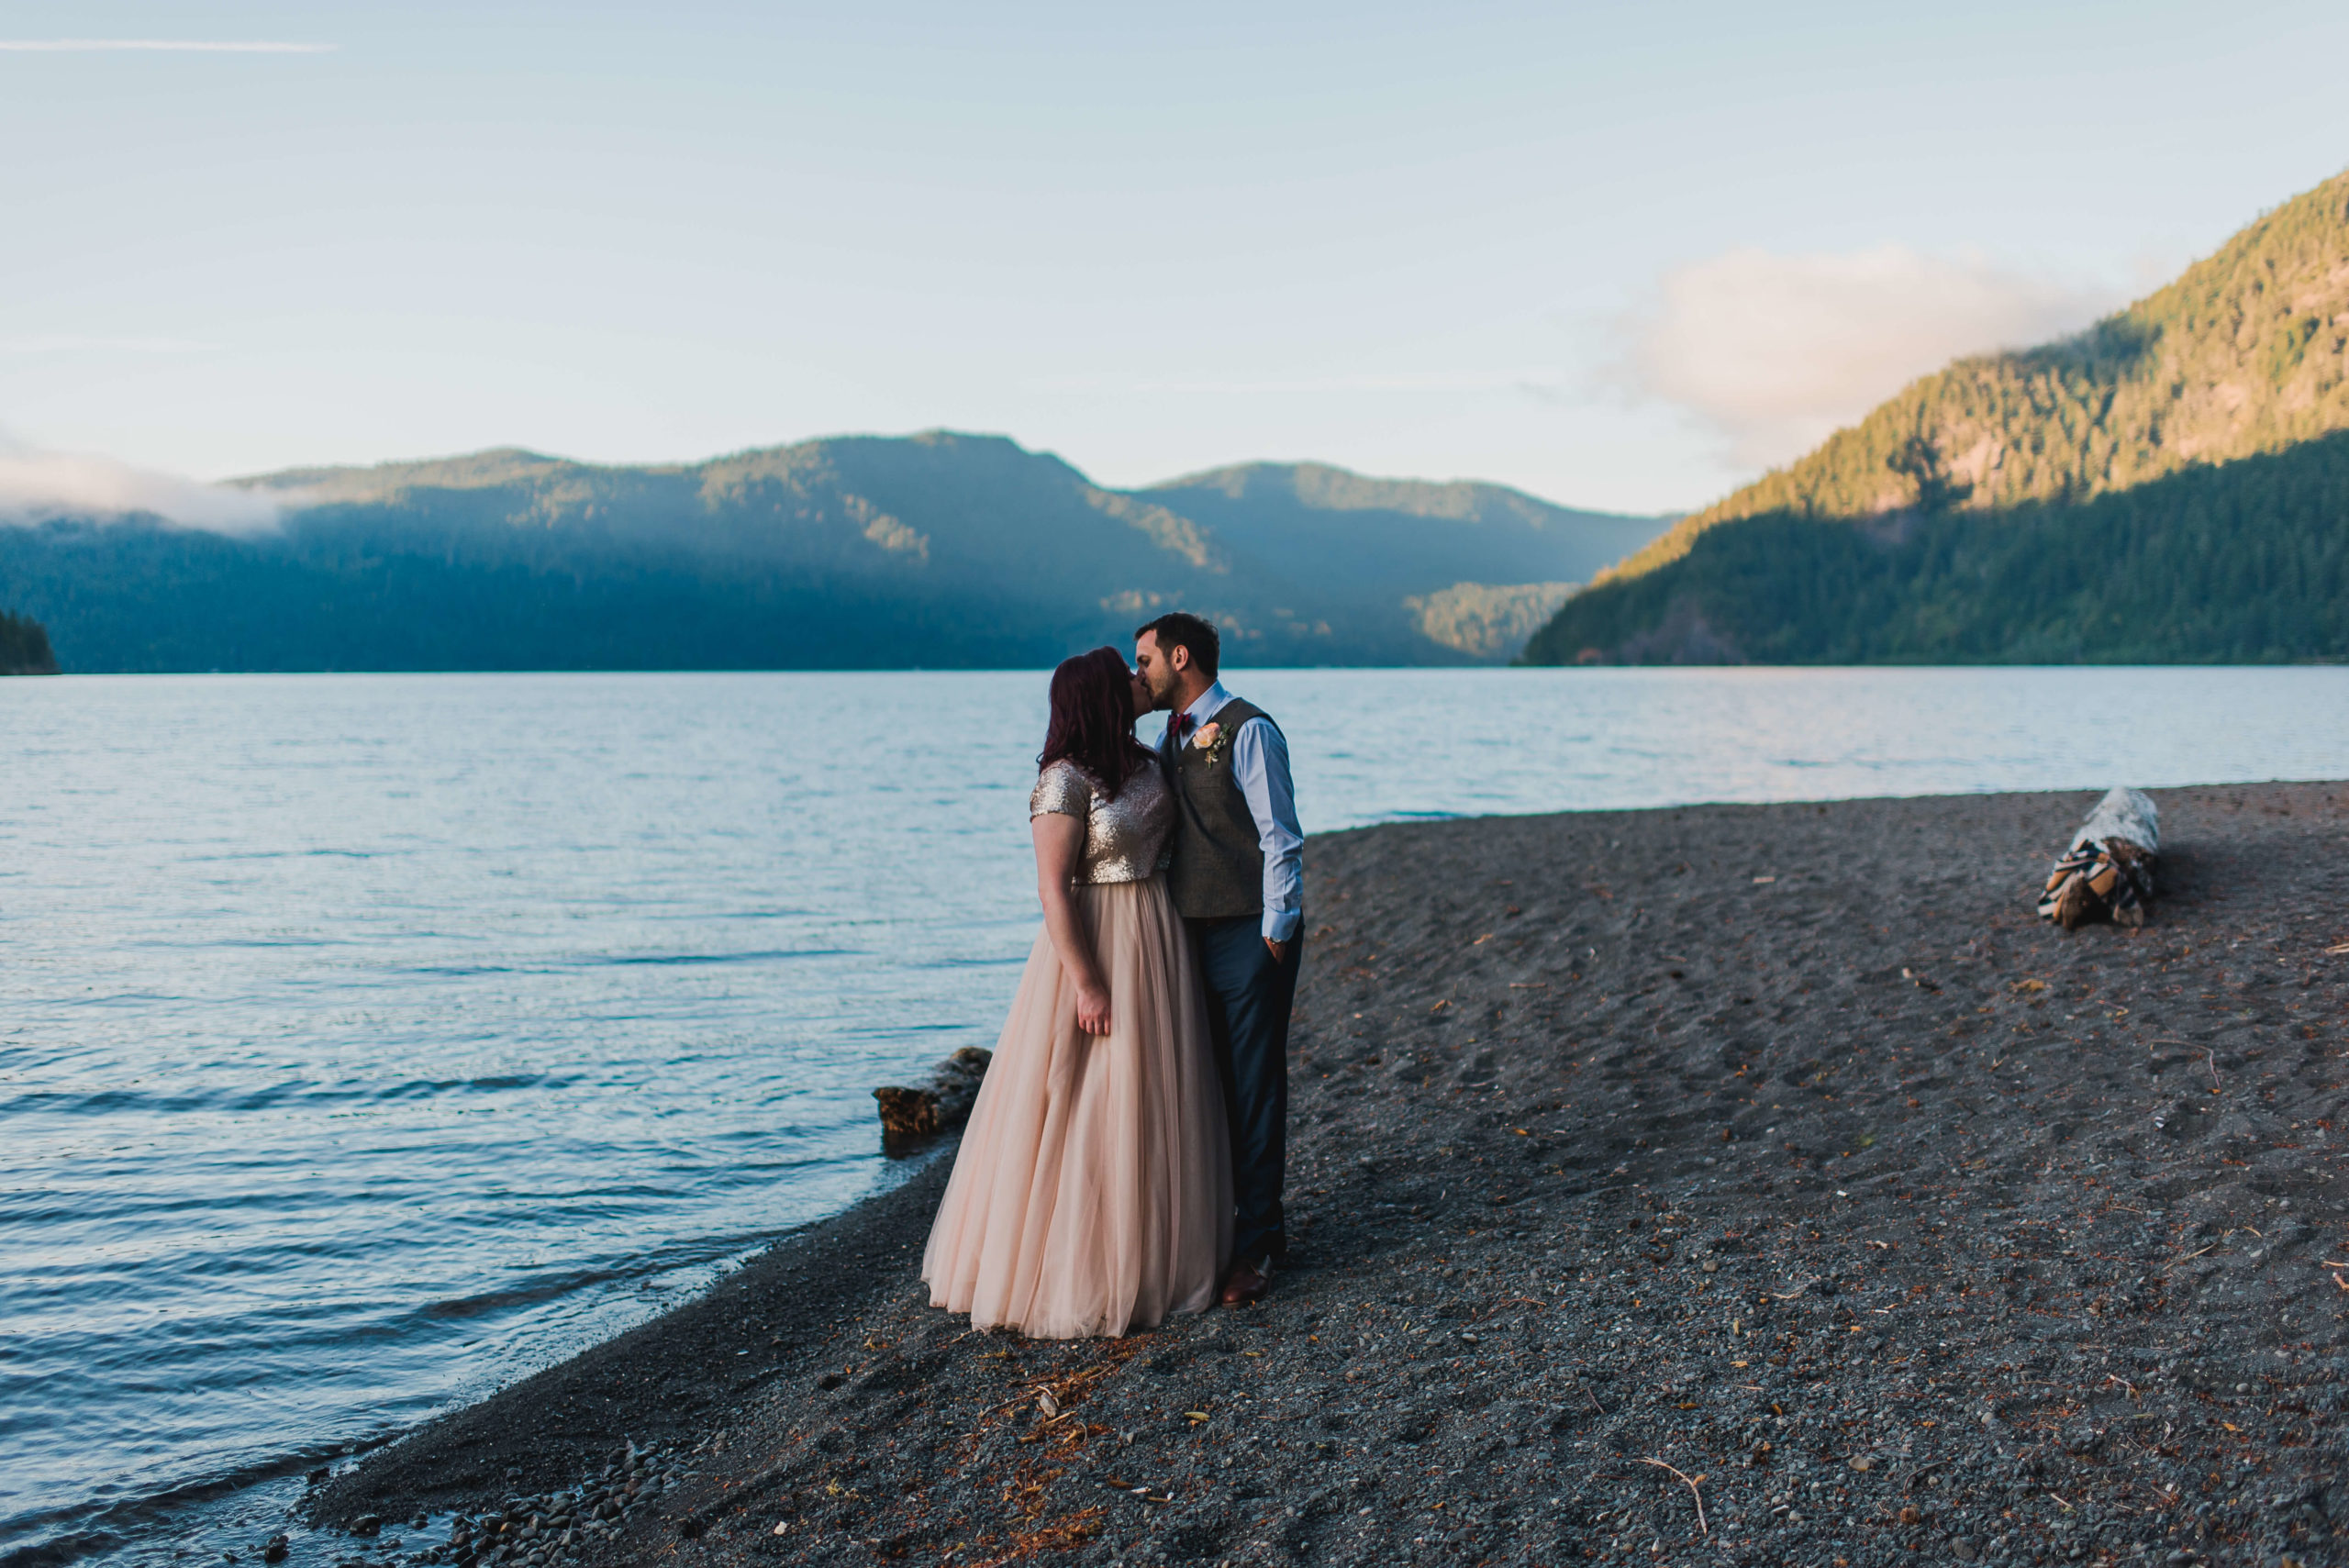 Lake Crescent Bride and Groom